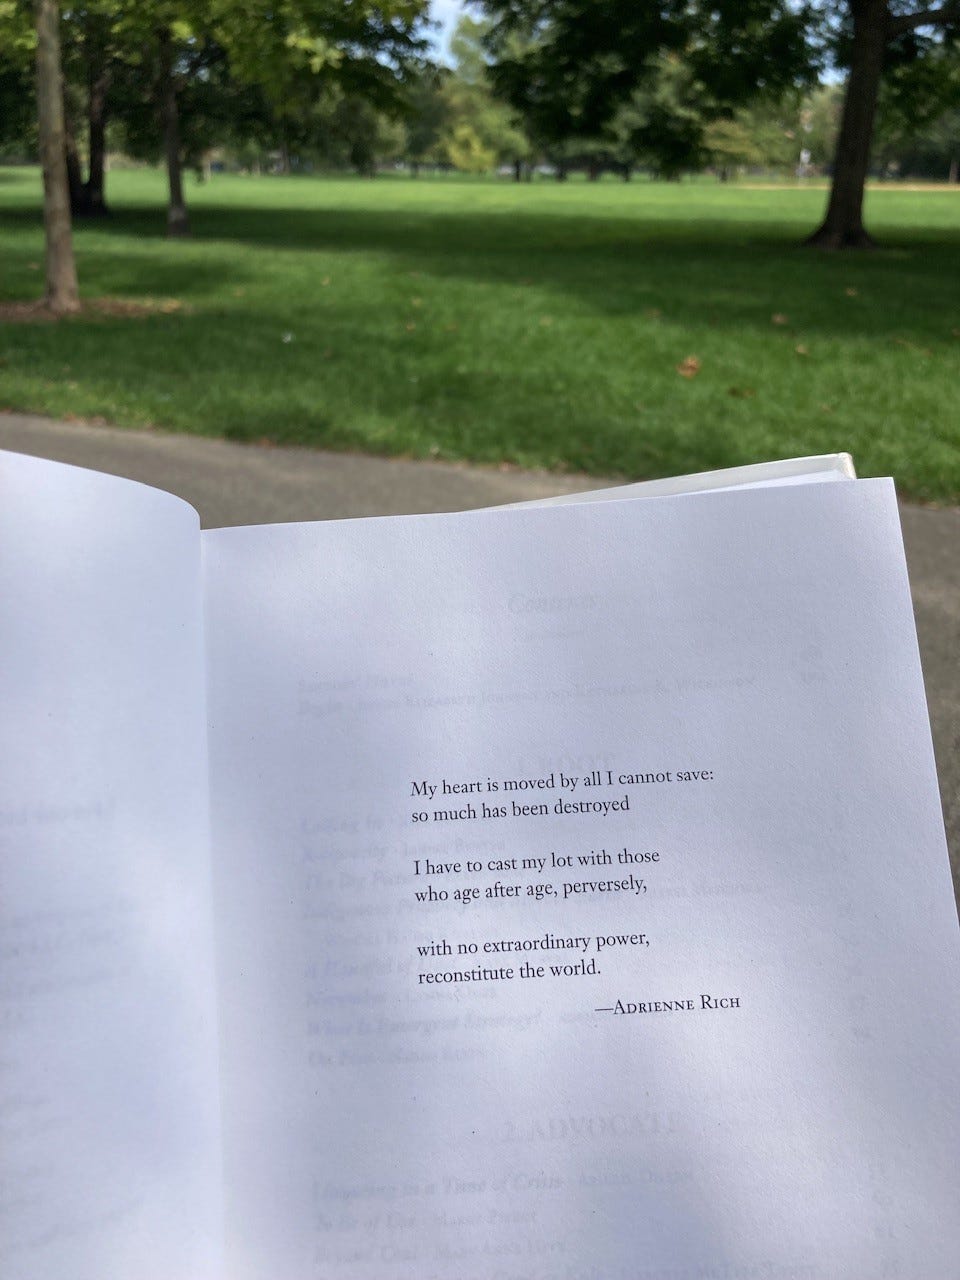 Sitting in a park with a book open to a page with an Adrienne Rich poem: “My heart is moved by all I cannot save: So much has been destroyed/I have to cast my lot with those who age after age, perversely/with no extraordinary power, reconstitute the world.”